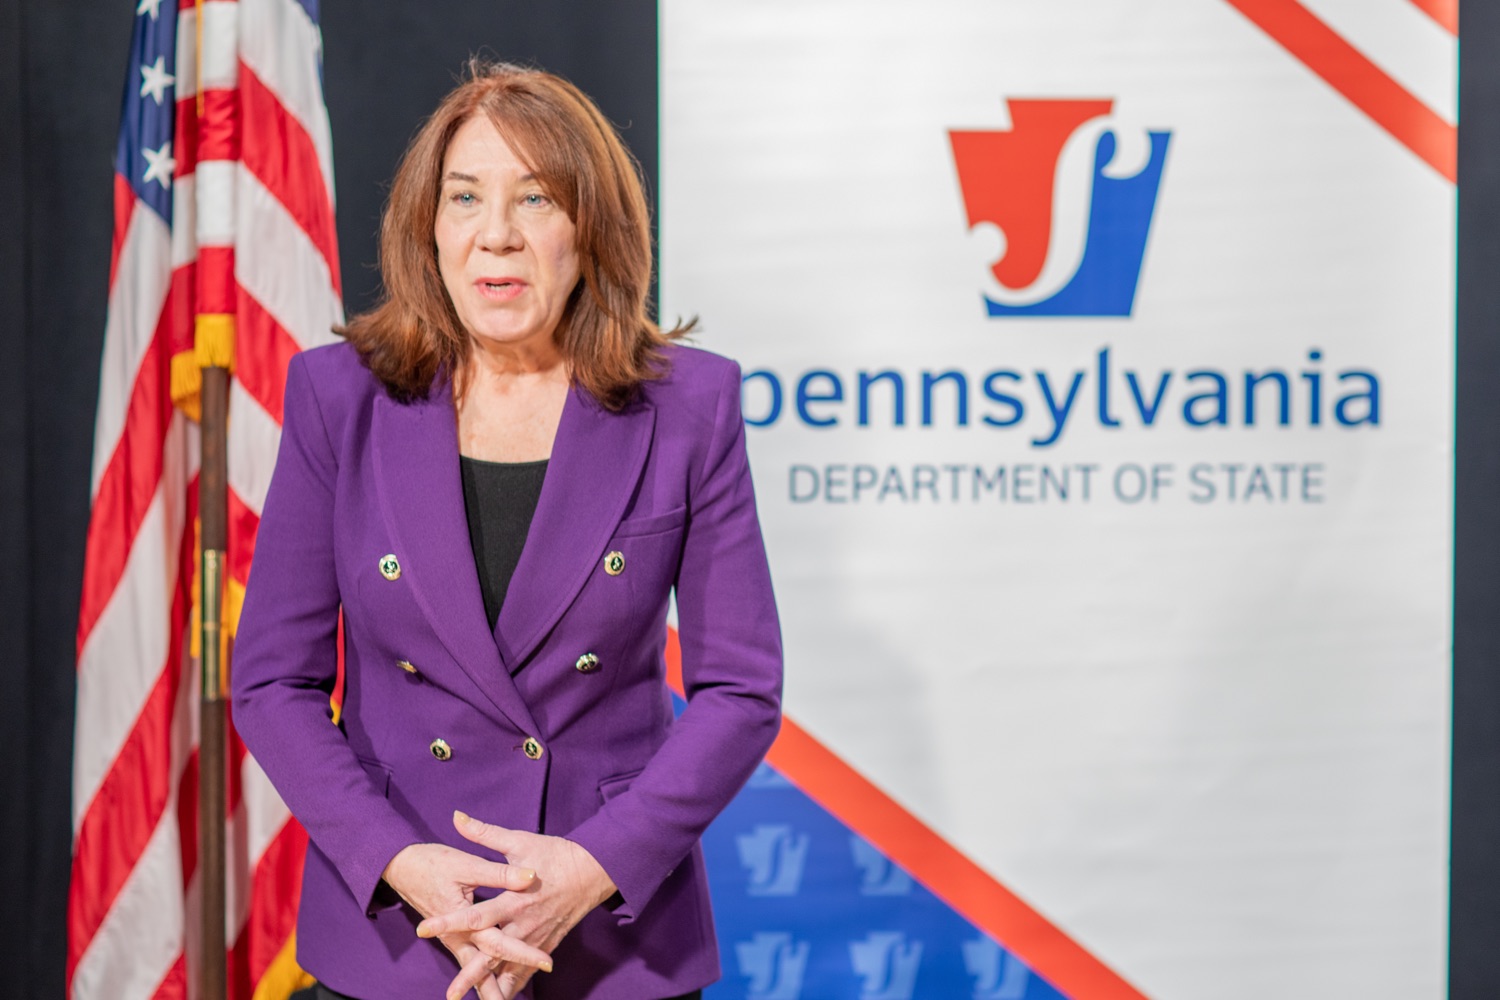 Executive Deputy Secretary Pam Iovino helps launch a statewide risk-limiting audit (RLA) of the 2022 midterm election by the rolling of 10-sided dice to generate the random 20-digit seed number counties will use to retrieve batches of ballots to be audited.<br><a href="https://filesource.amperwave.net/commonwealthofpa/photo/22366_DOS_AuditDice_05.jpeg" target="_blank">⇣ Download Photo</a>